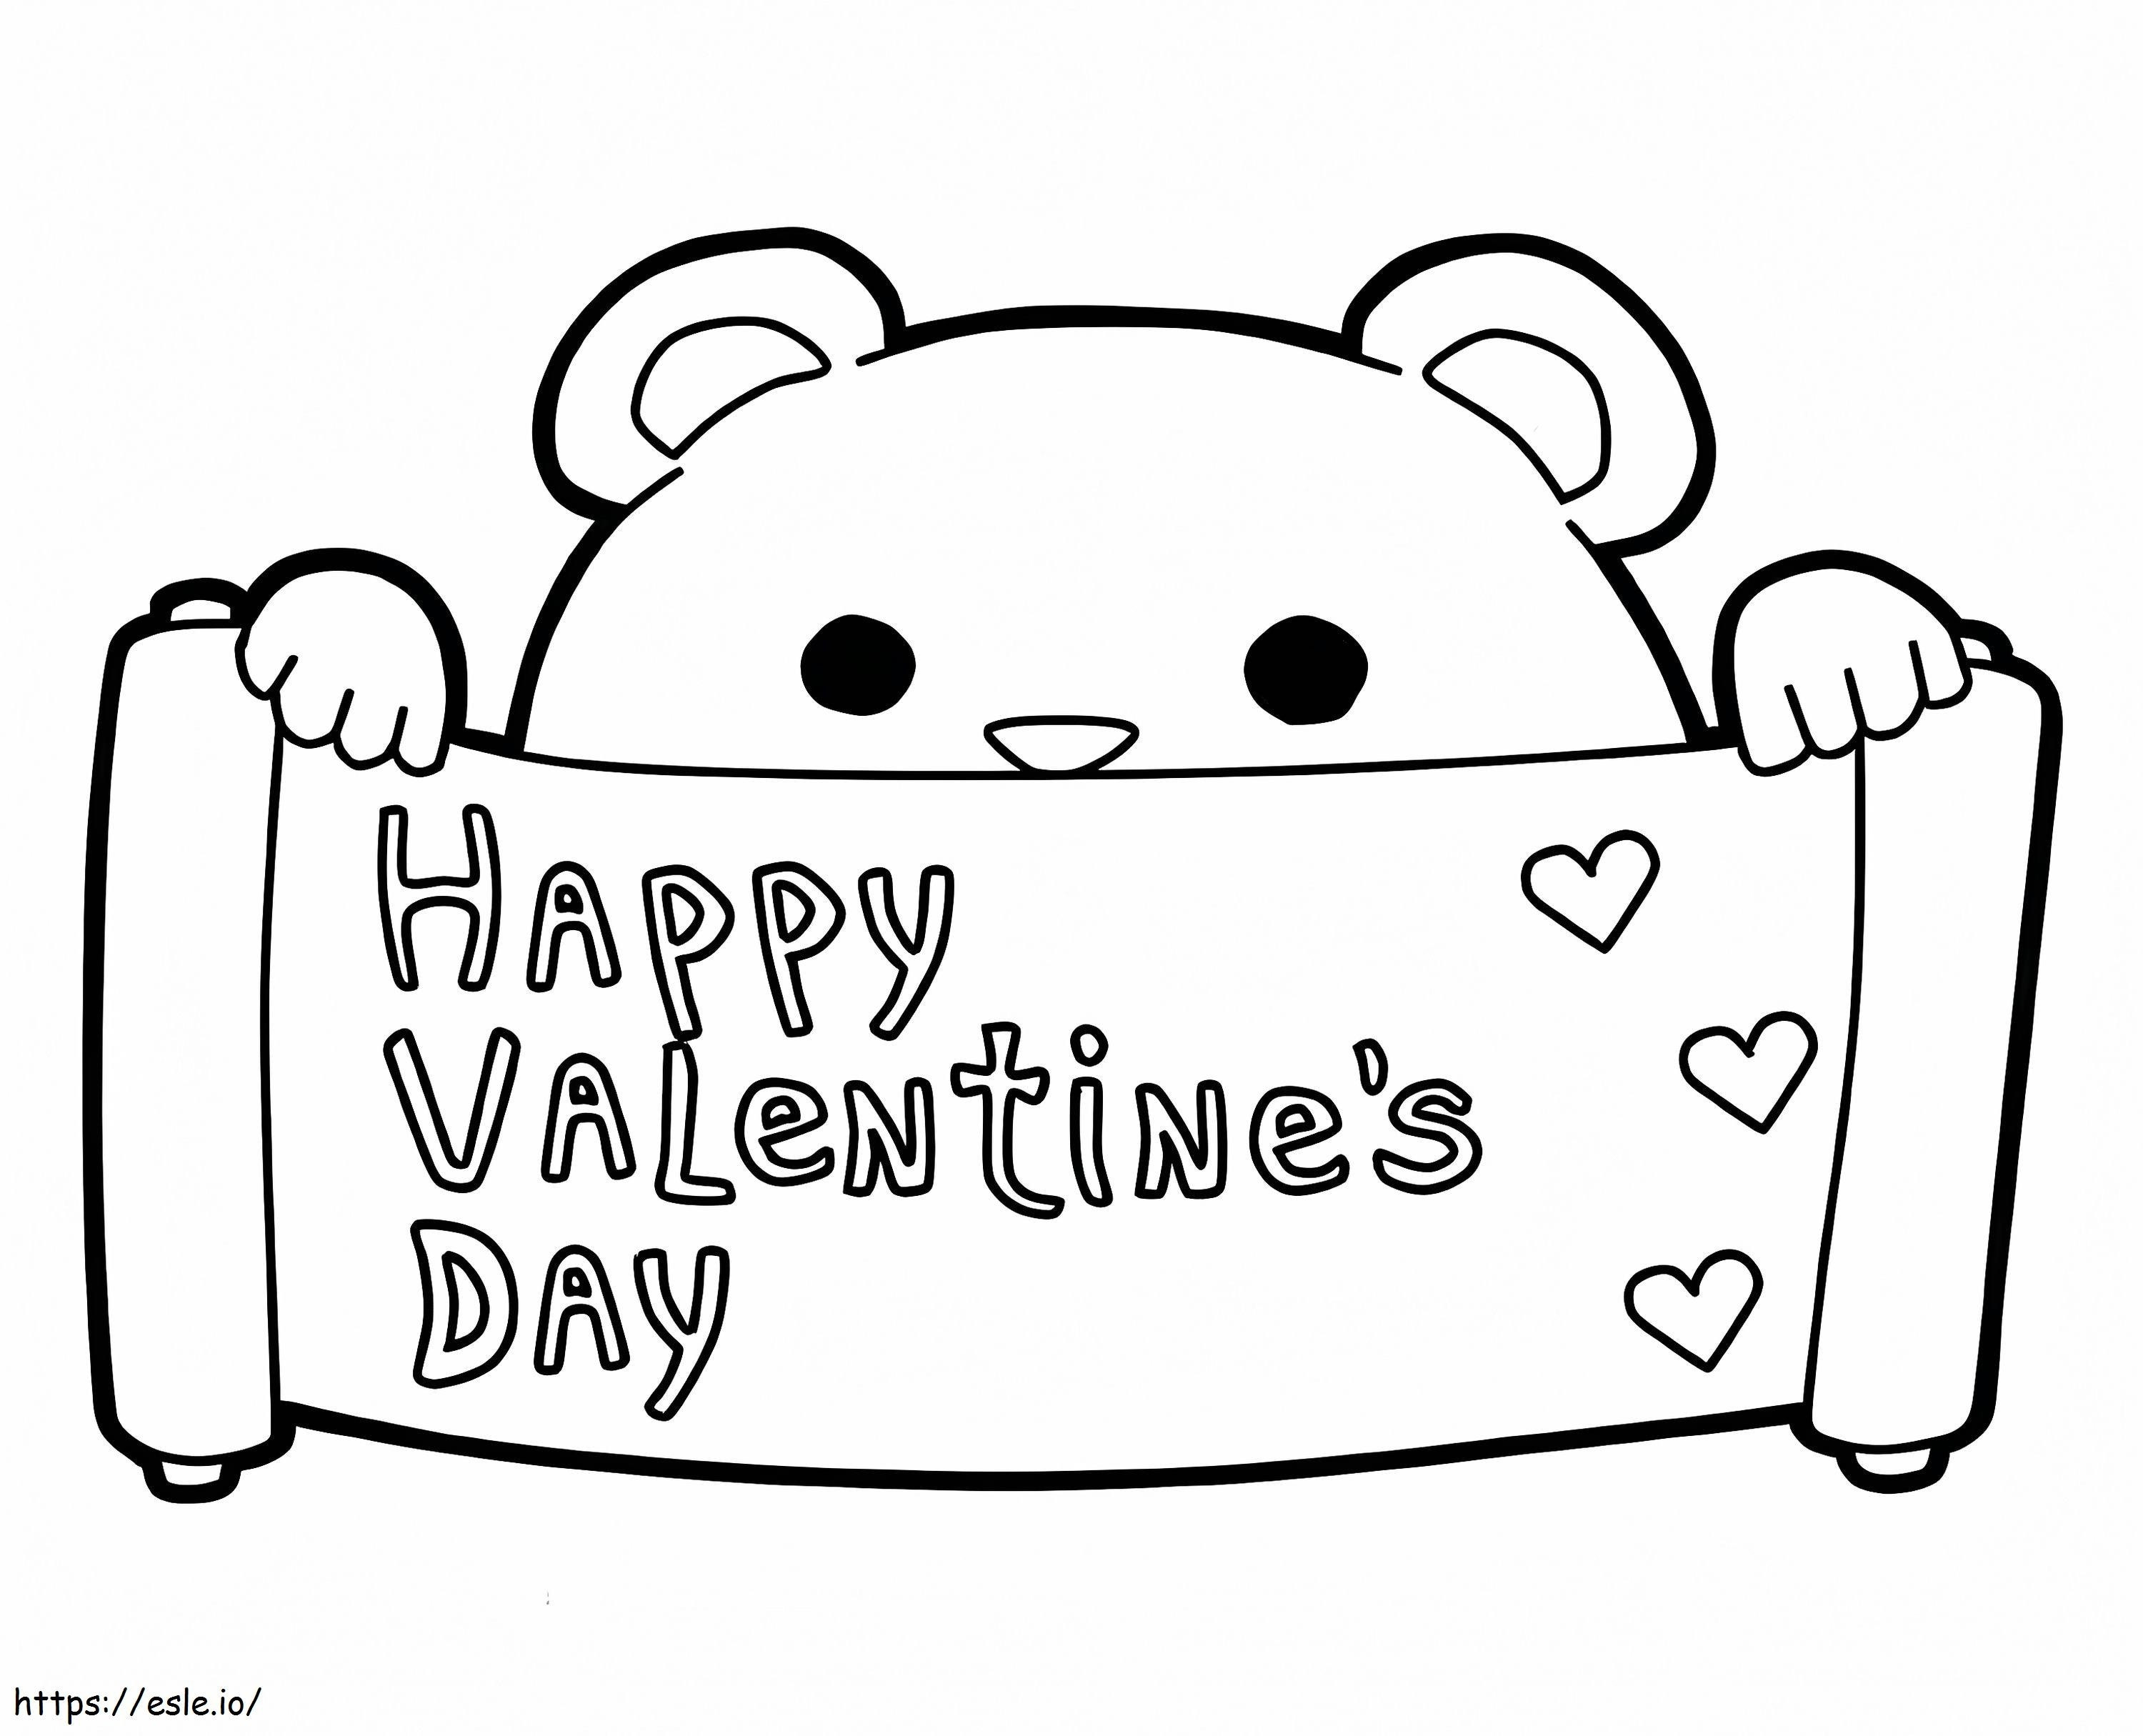 Cute Valentines Day Card coloring page